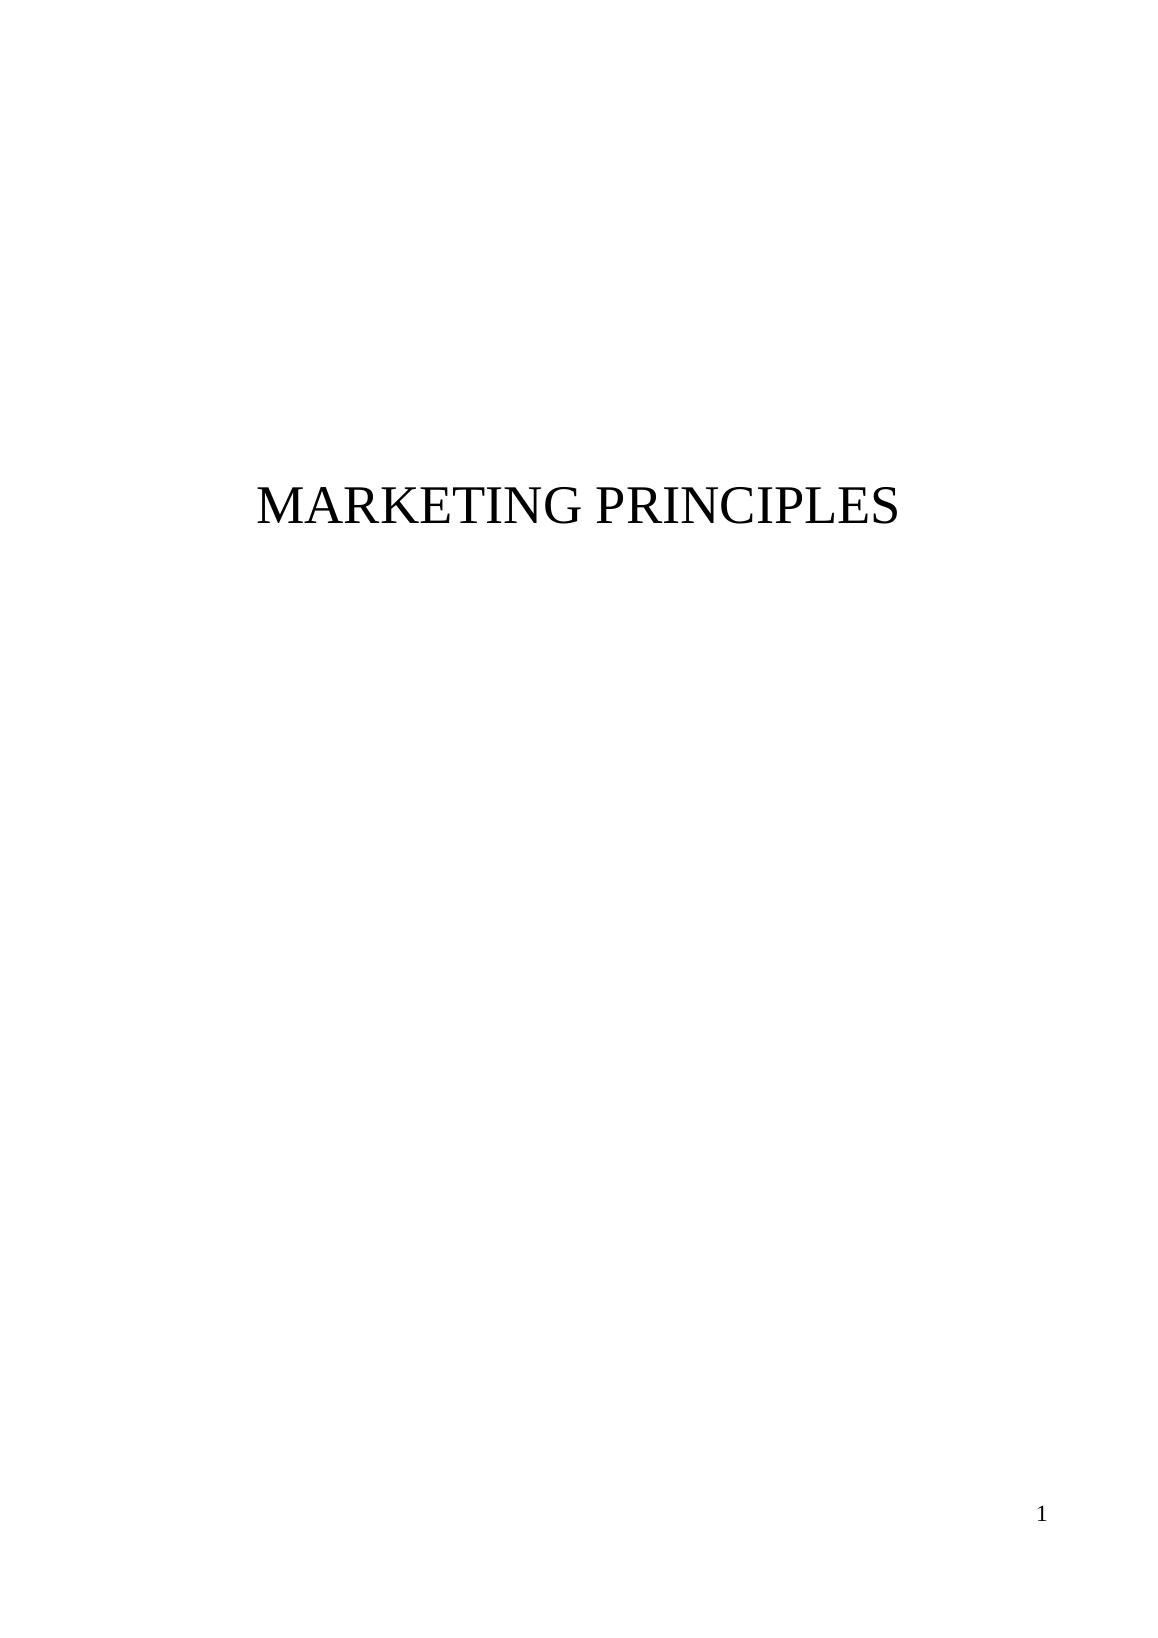 MARKETING PRNCIPLES TABLE OF CONTENTS_1